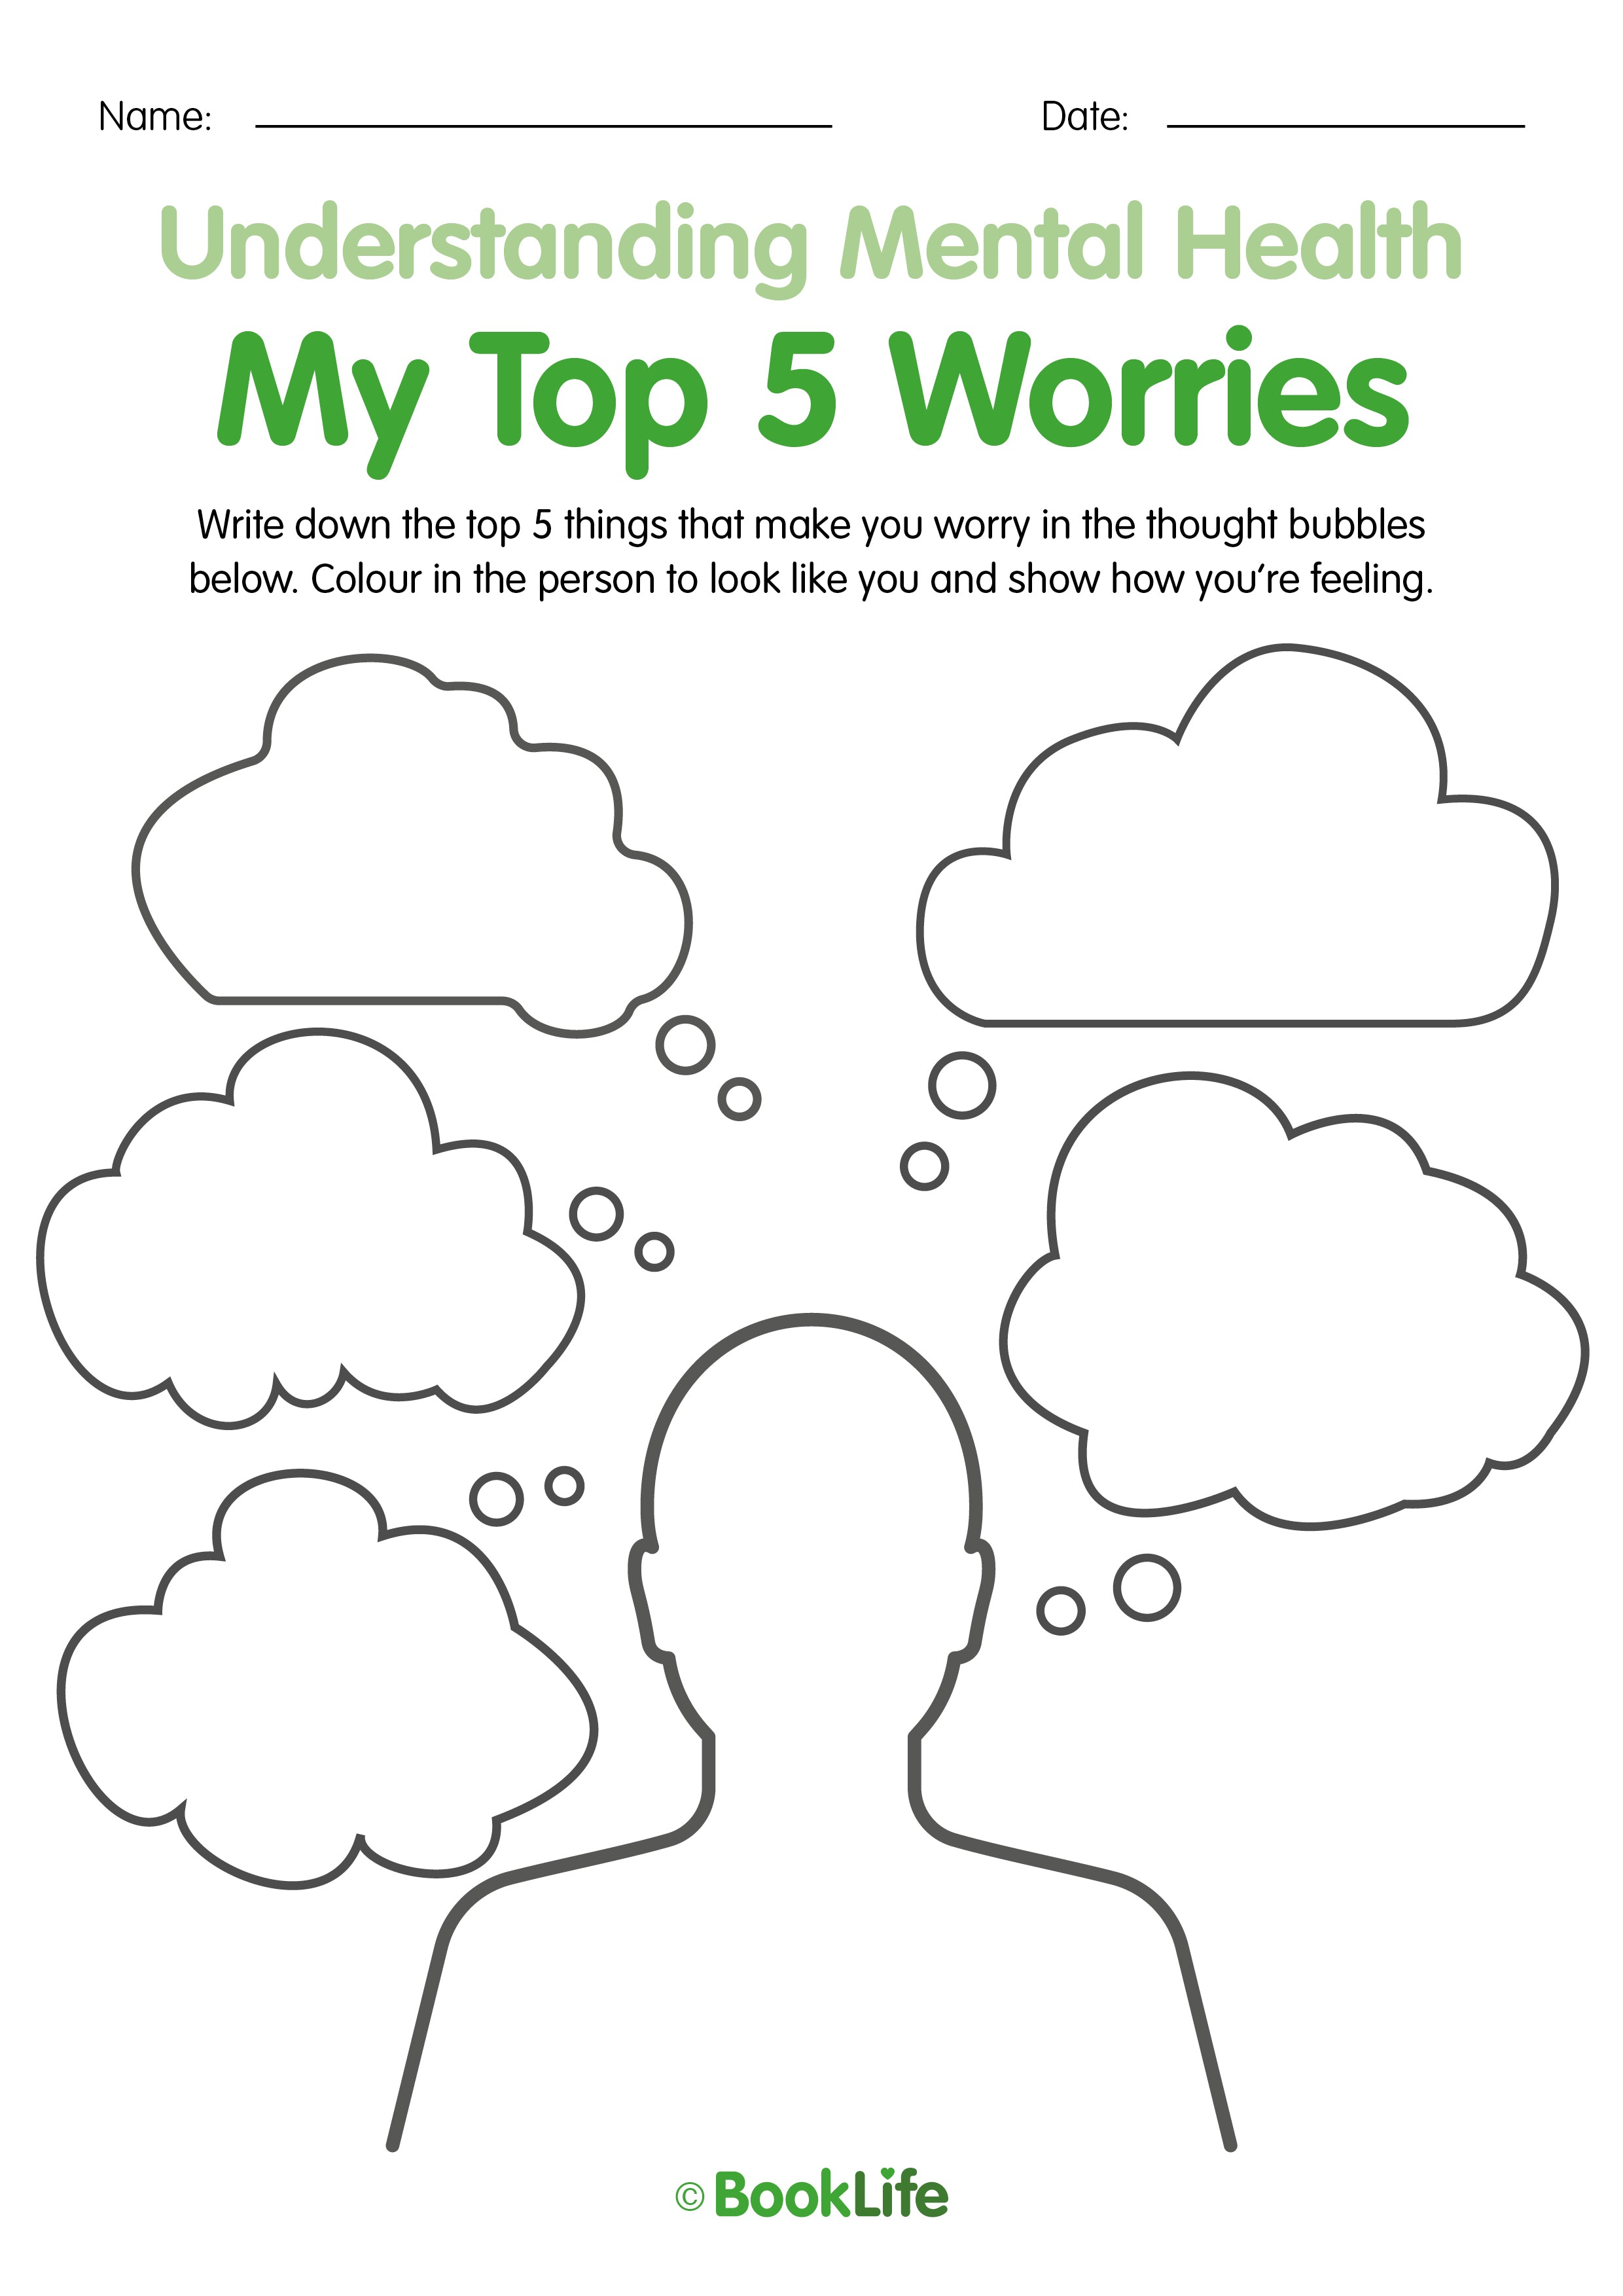 My Top 5 Worries Activity Sheet by BookLife